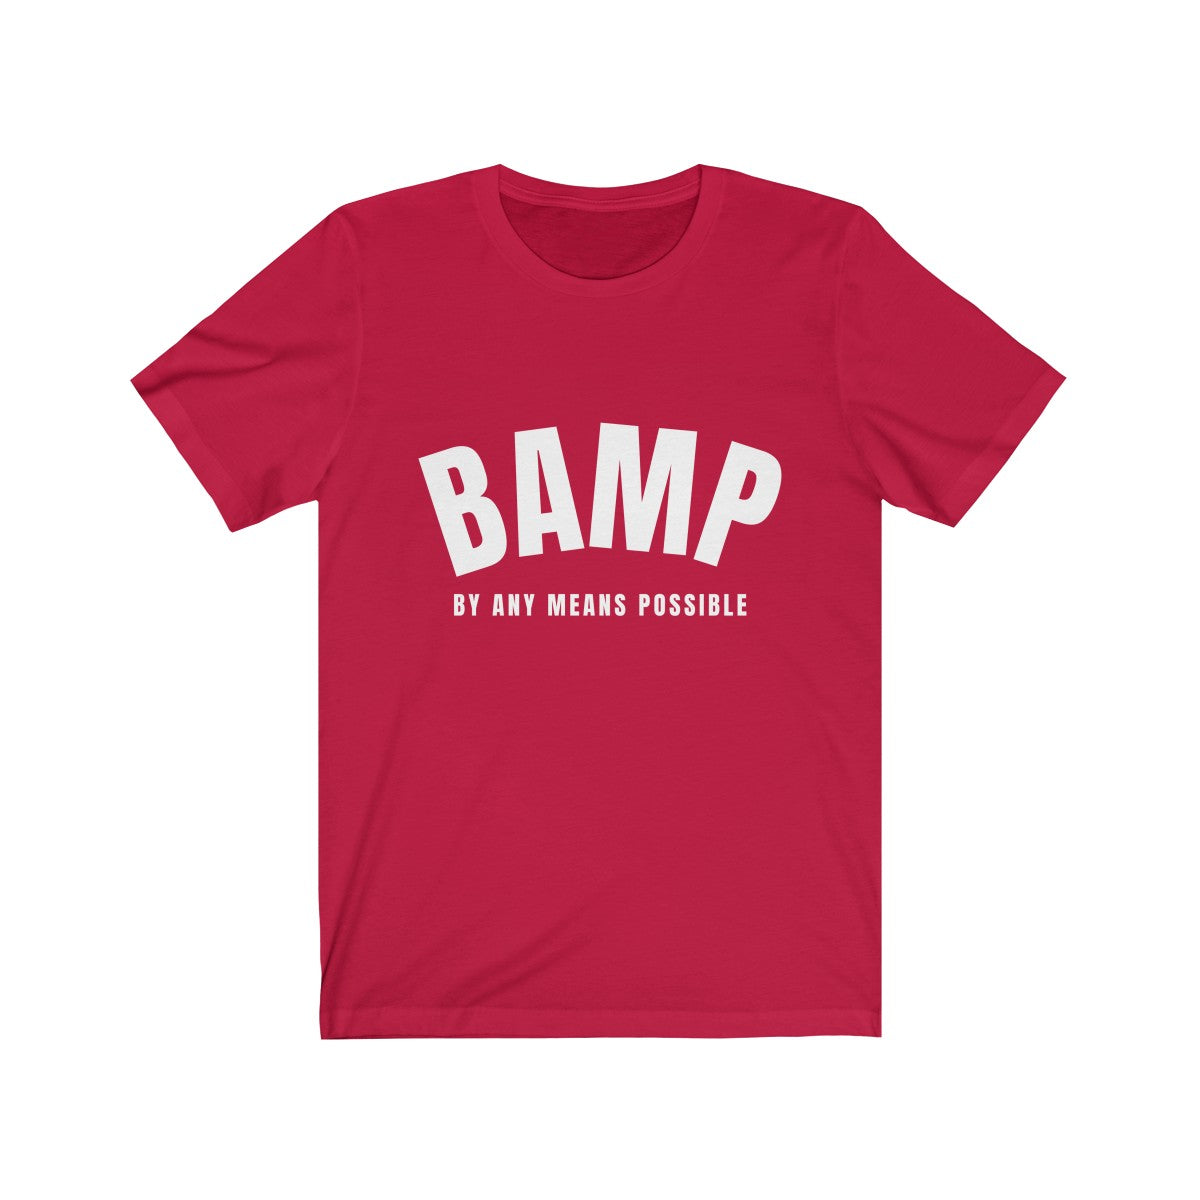 BAMP - By Any Means Possible - Ver2 - Unisex T-Shirt (4 Colors) - Beyond The Walls Int'l